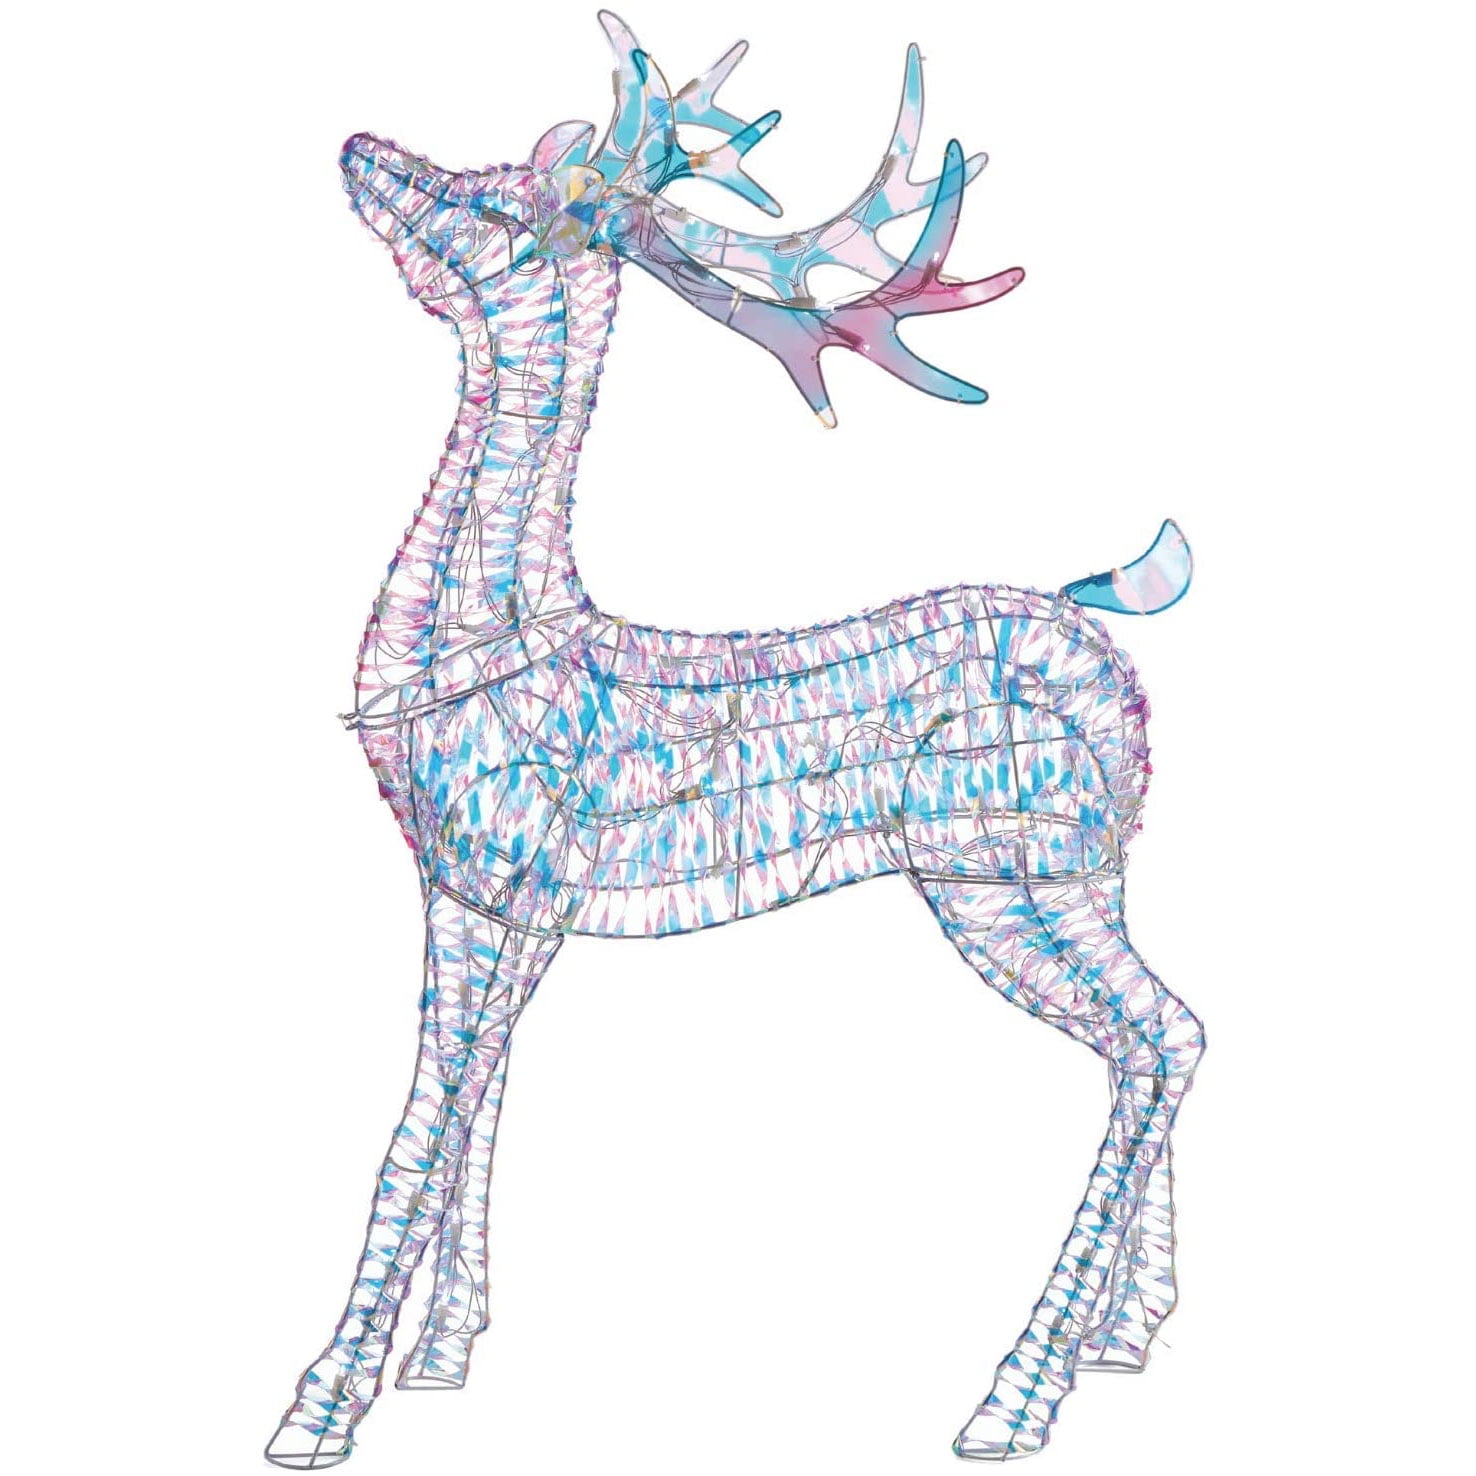  Iridescent Christmas Reindeer and Santa Sleigh Set - Lighted  Christmas Yard Decoration - Perfect for Indoor or Outdoor Lawn Ornaments  (4ft w/ 140 Lights) : Patio, Lawn & Garden